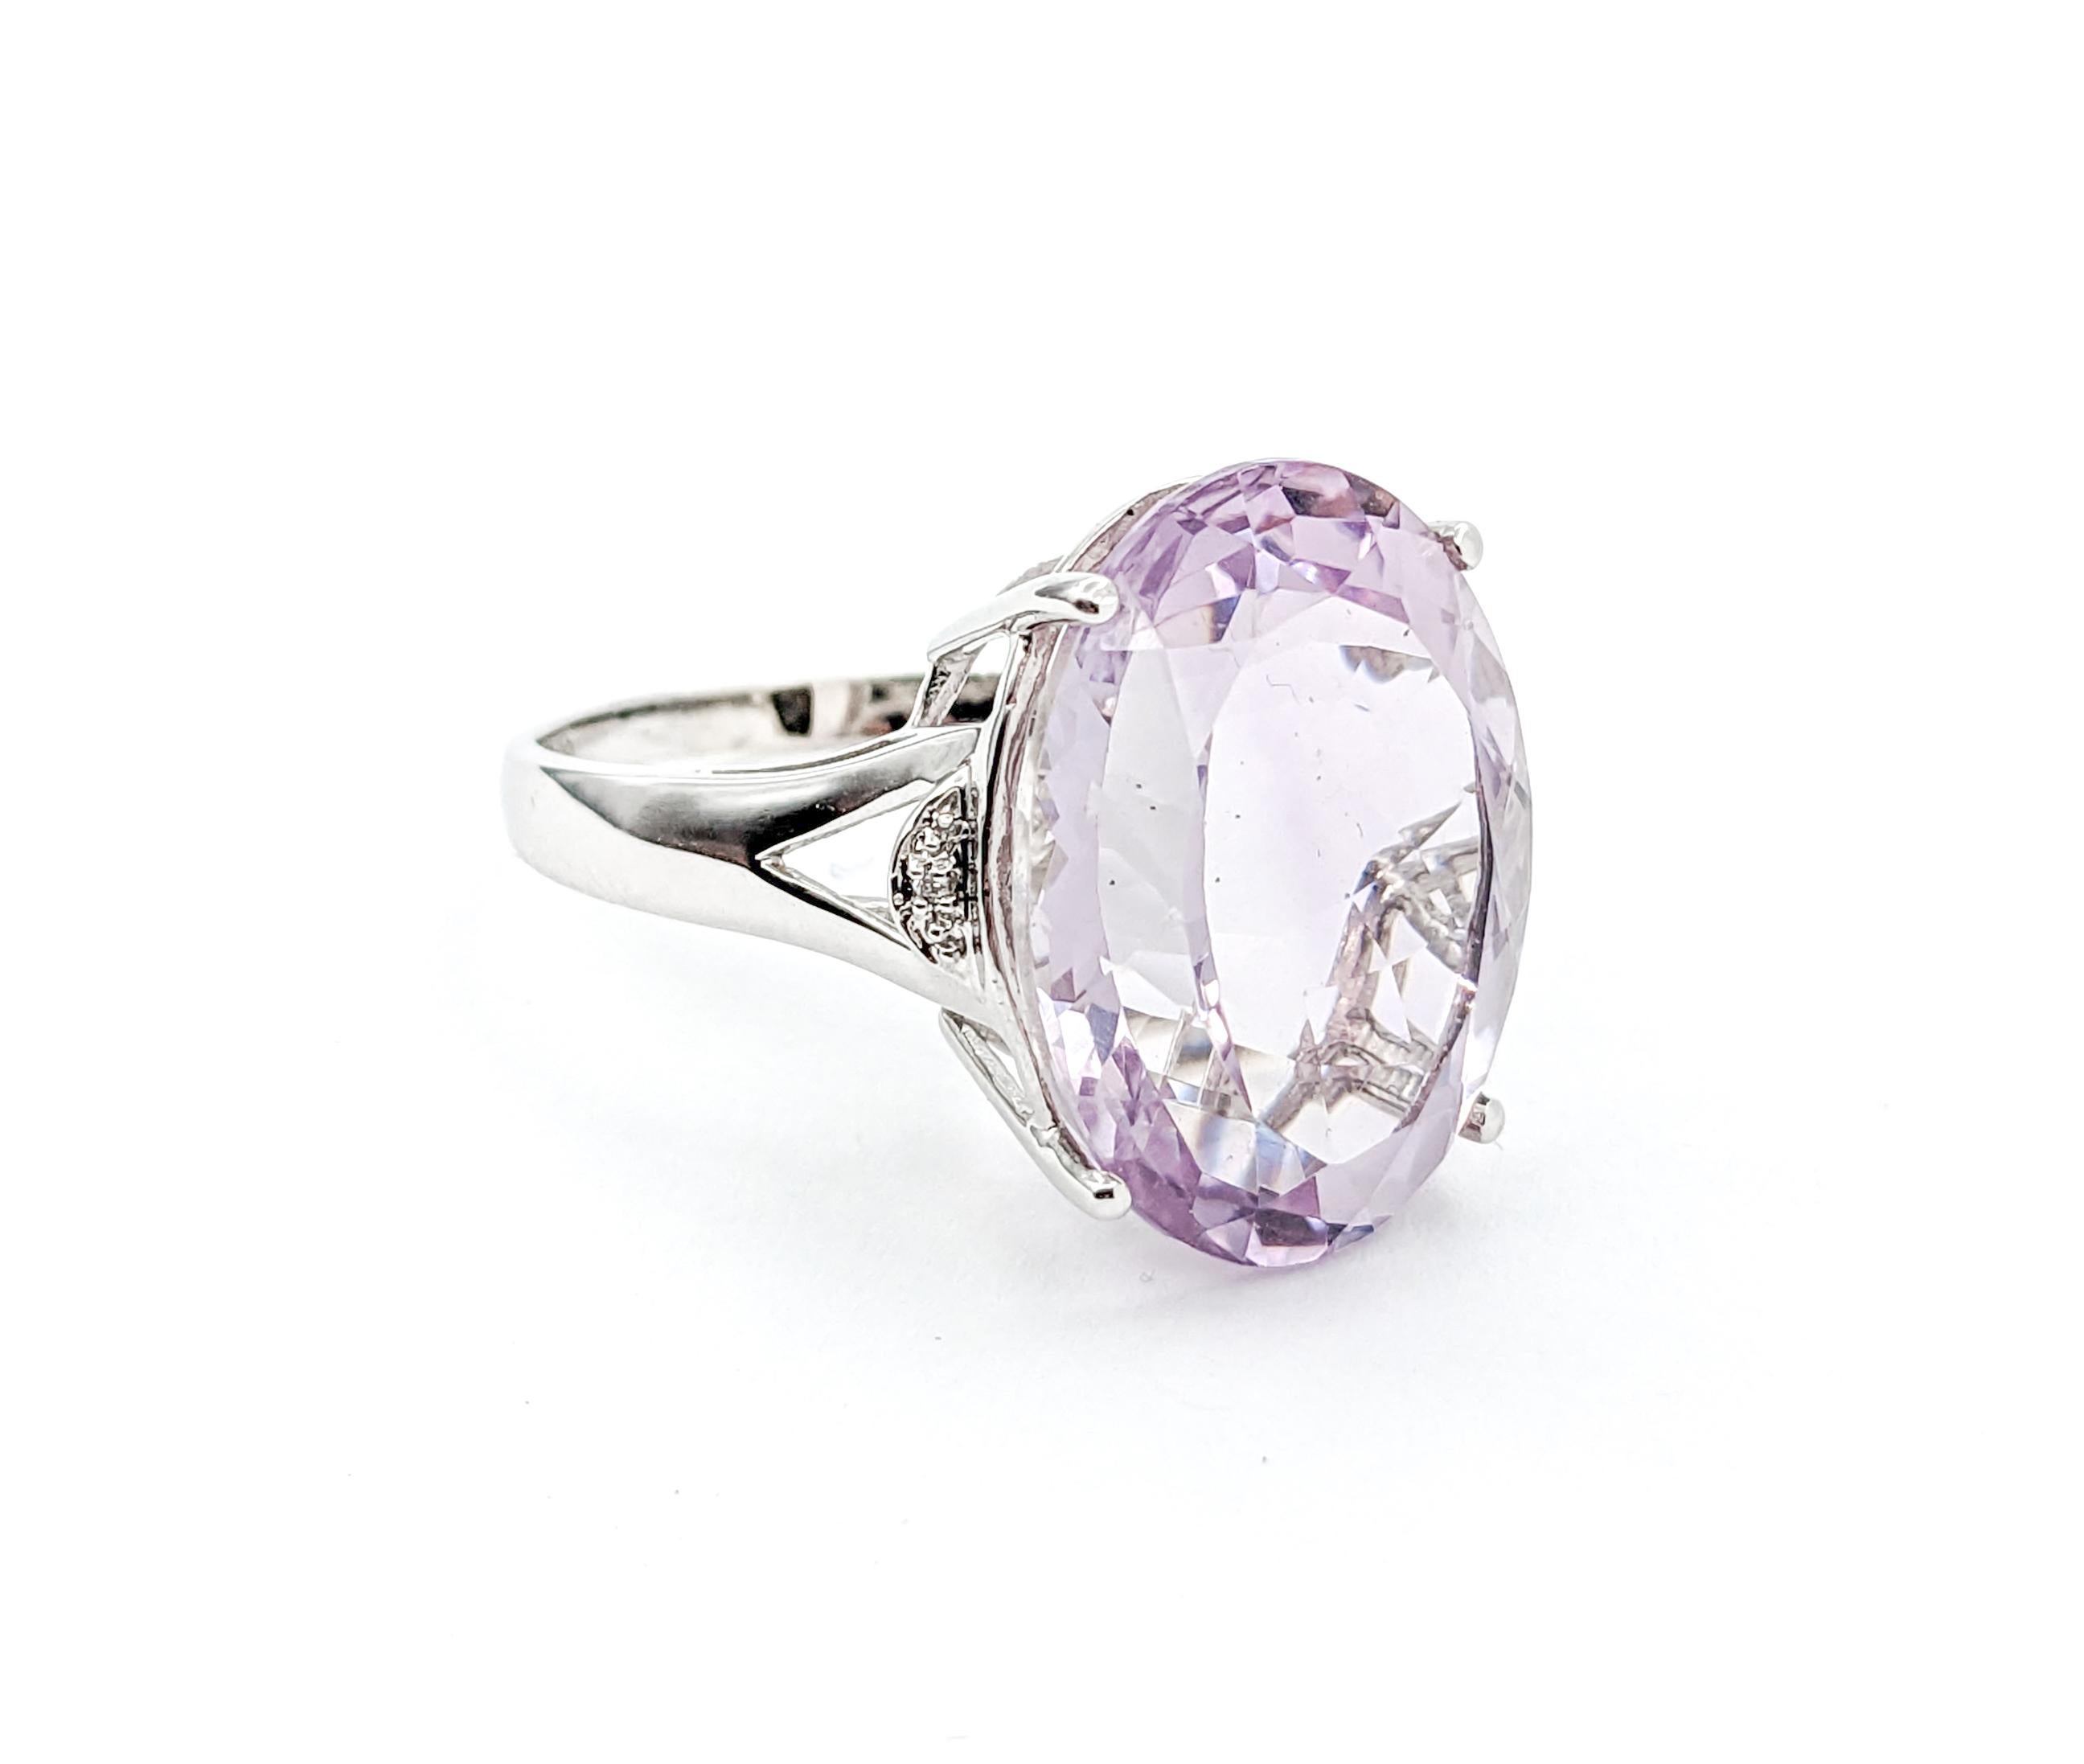 17ct Light Amethyst & Diamond Cocktail Ring

This beautiful ring is crafted in 18kt white gold and features an impressive 17.00ct oval-cut amethyst and .01ctw round-cut diamonds, SI2 clarity and G-H color. This ring is size 10 but can be adjusted